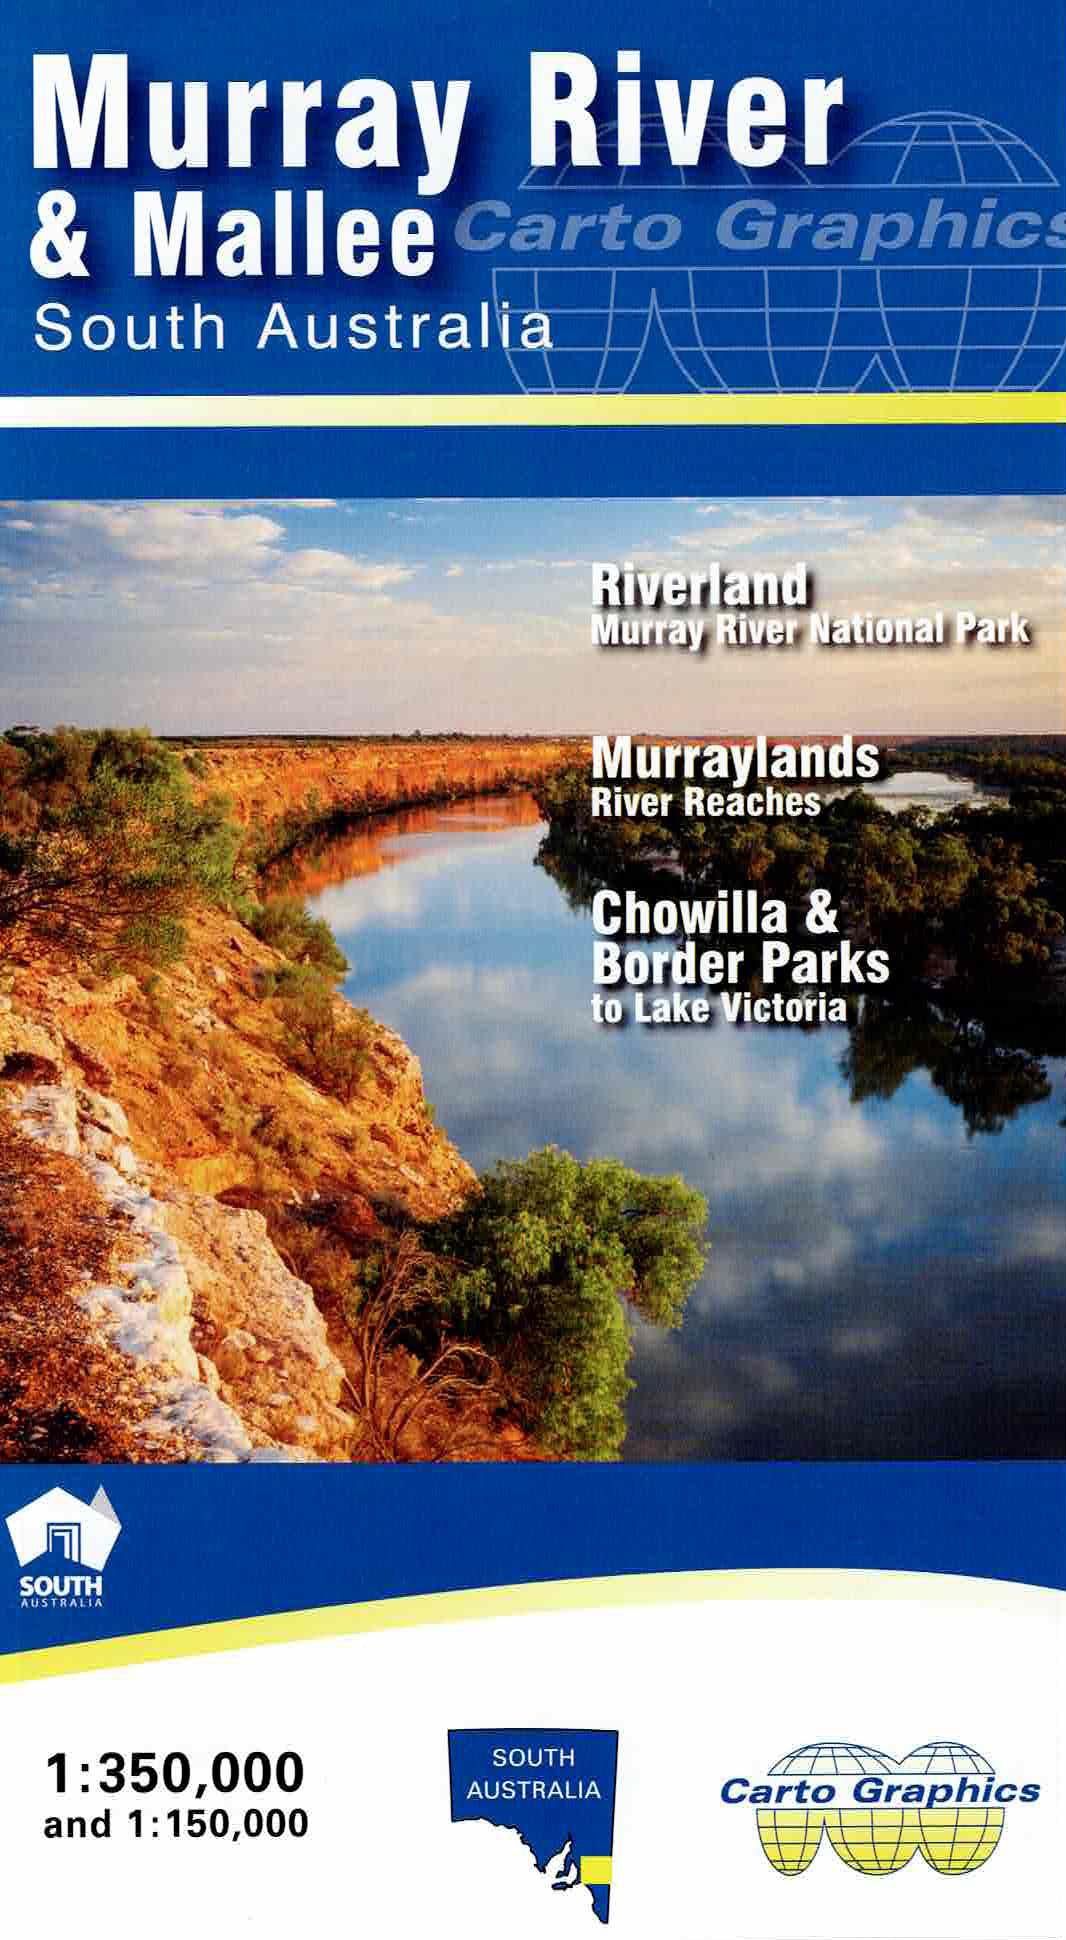 Murray River & Mallee Road Map by Carto Graphics (2022)